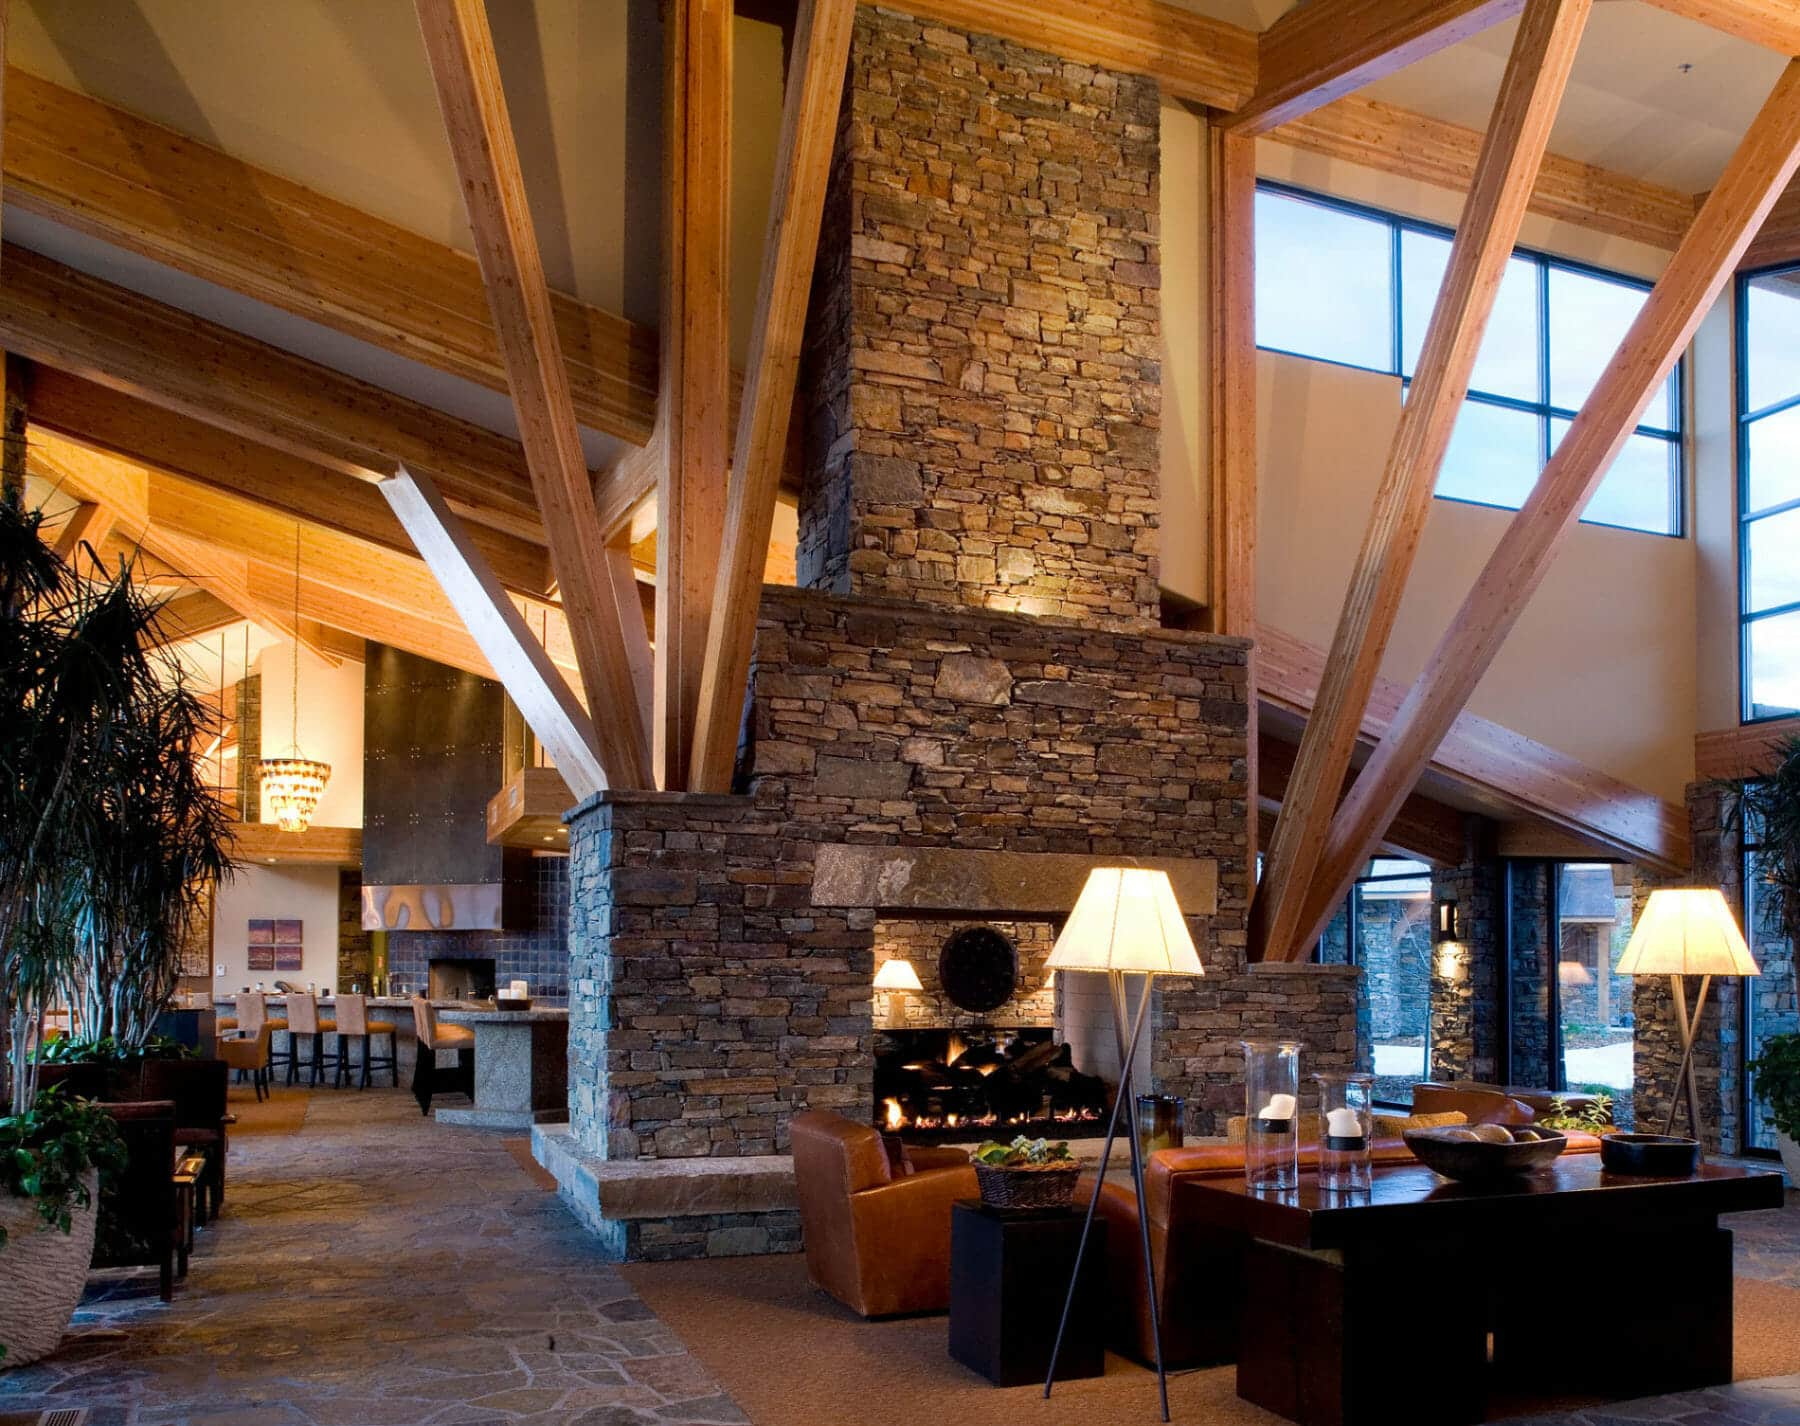 Promontory Clubhouse Interior | Ranch Clubhouse Design Architect | Think Architecture